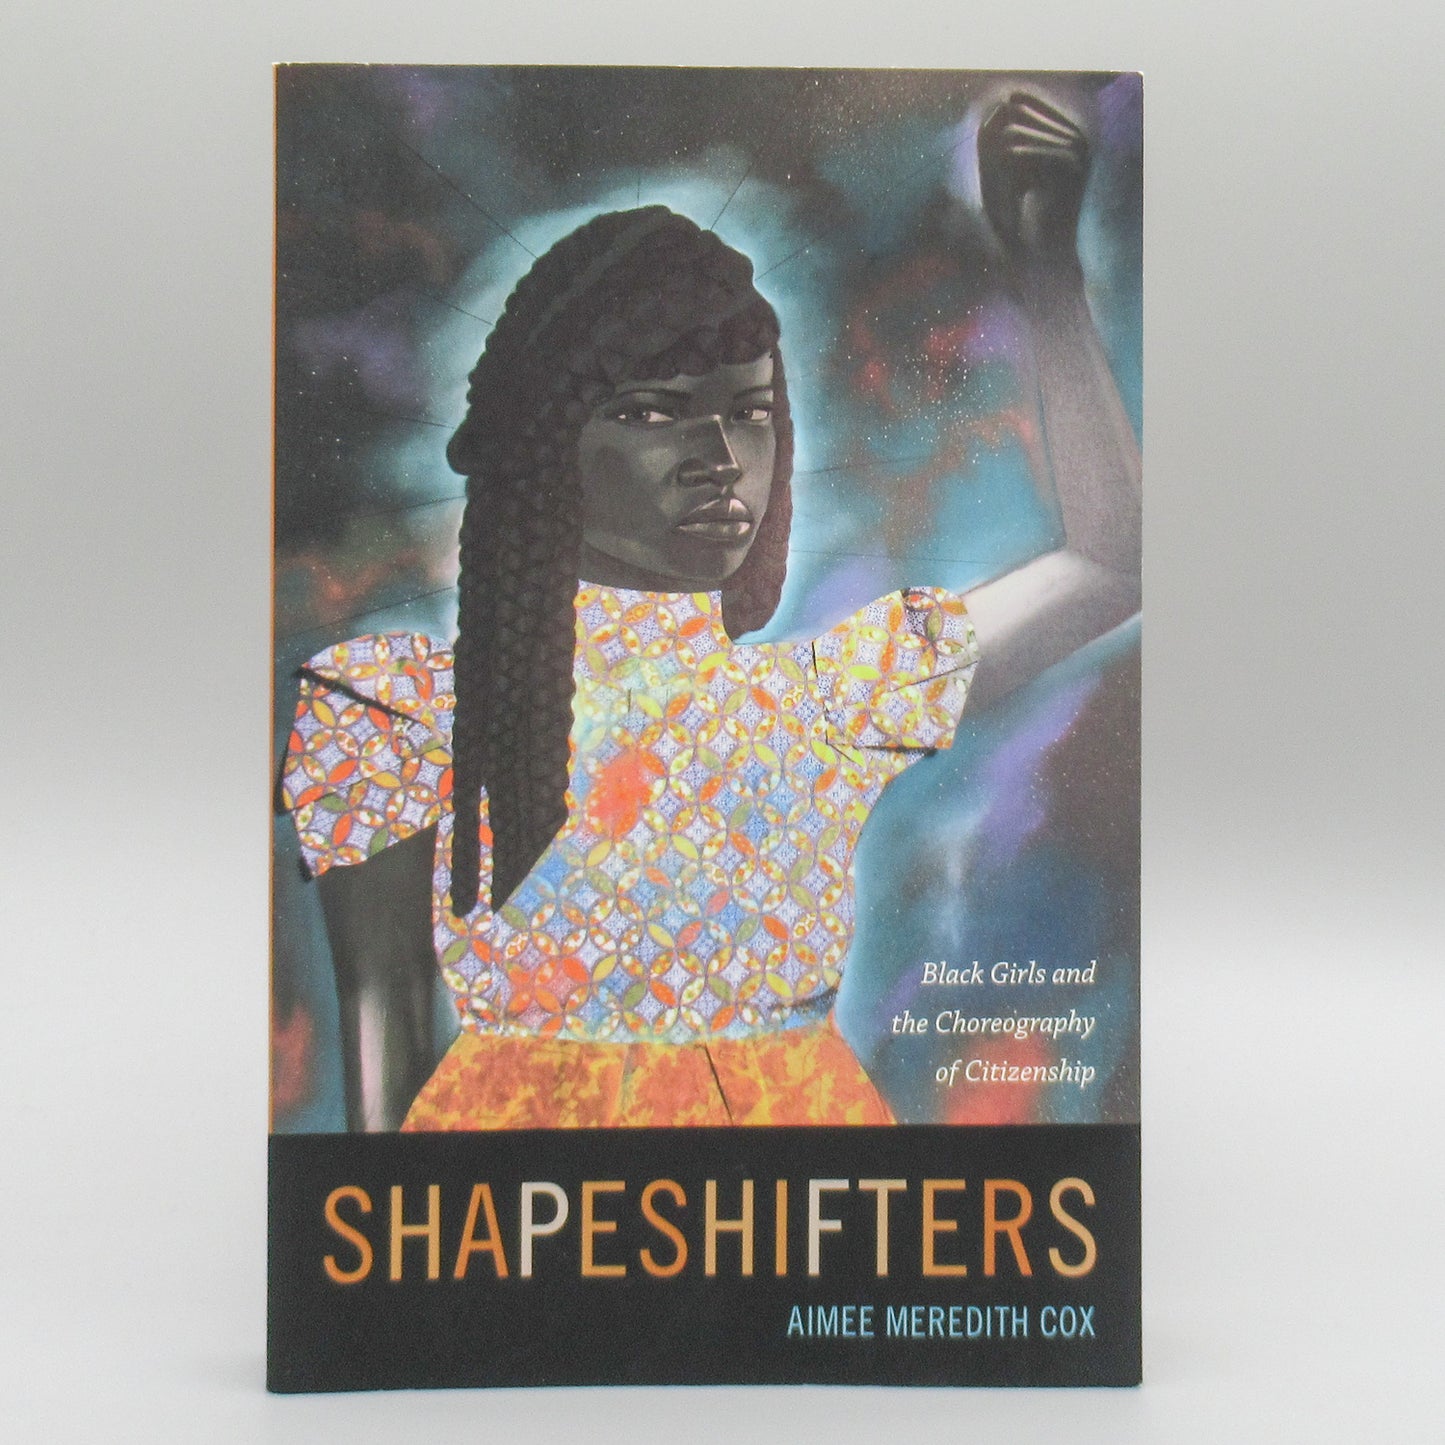 Shapeshifters: Black Girls and the Choreography of Citizenship